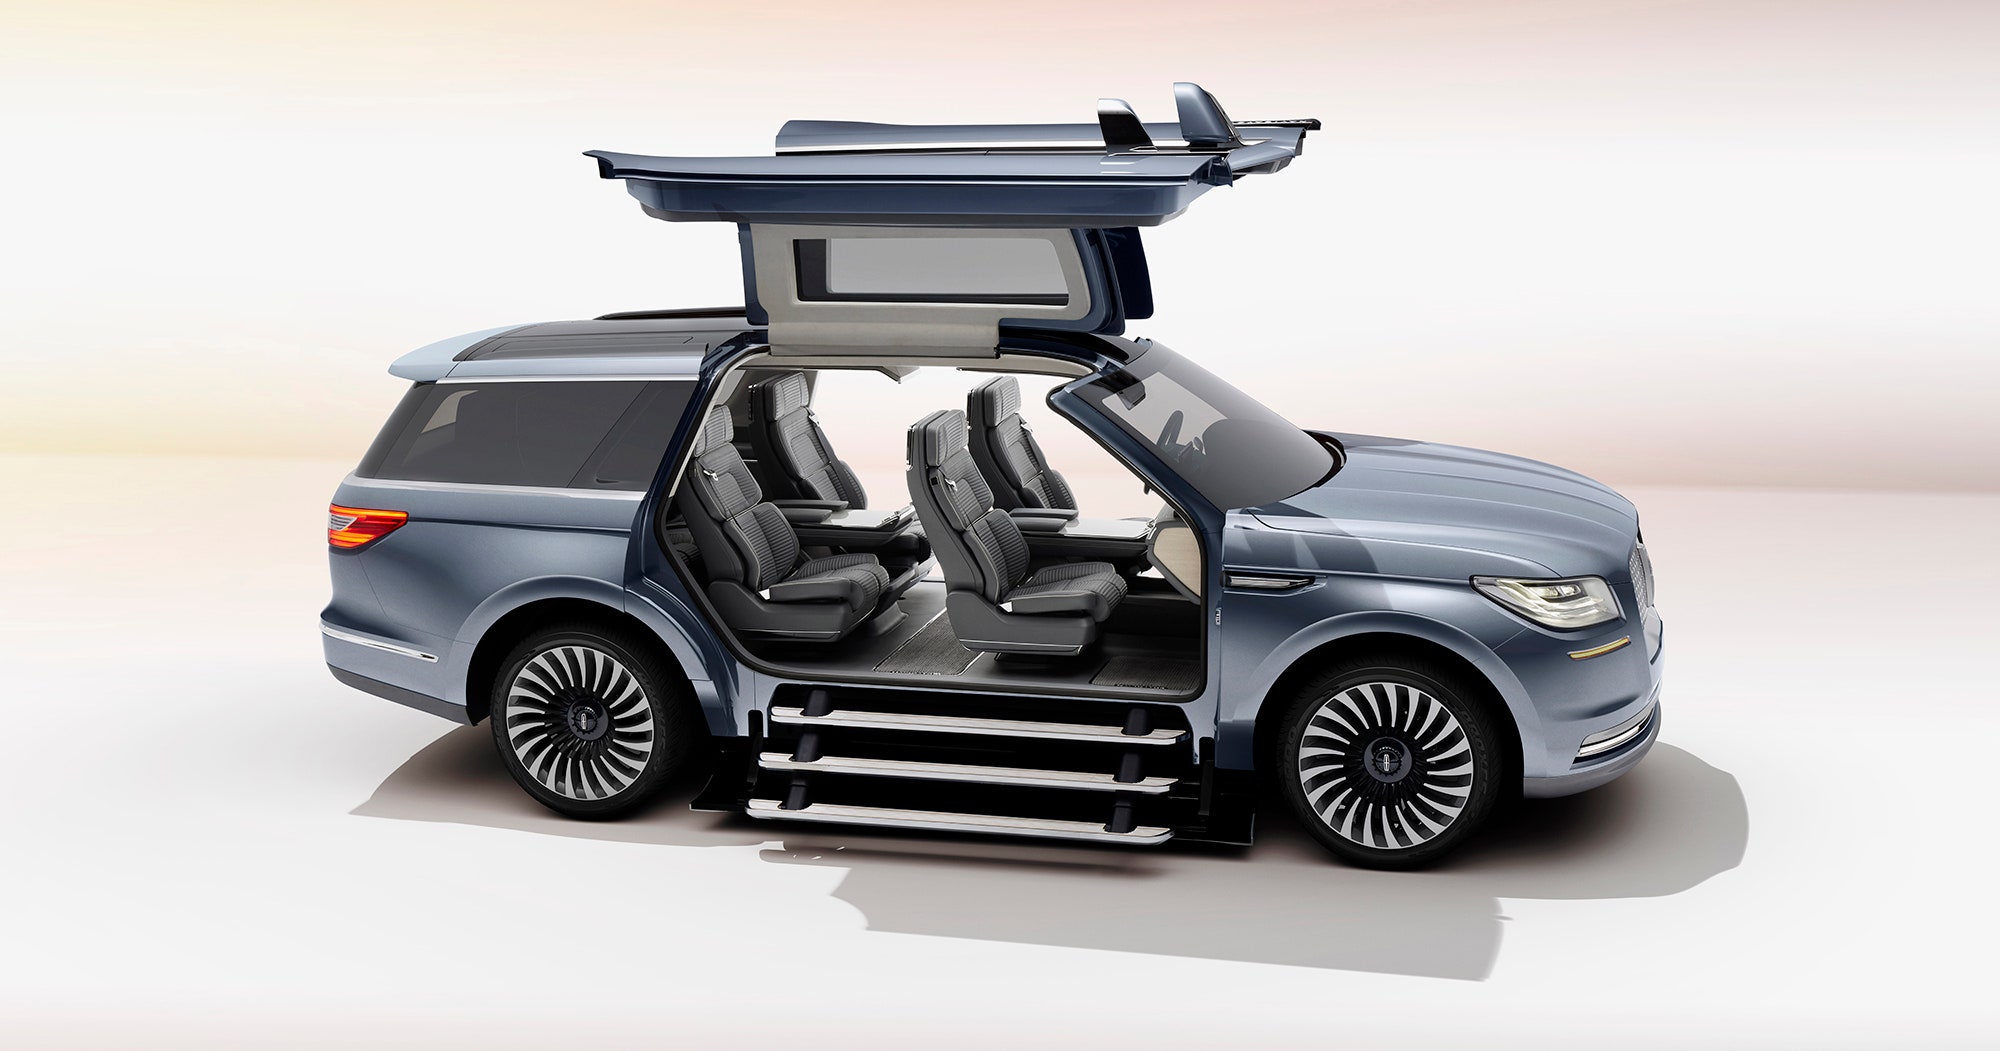 Lincoln's Yacht-Sized Concept SUV Has a Closet and Staircase | WIRED